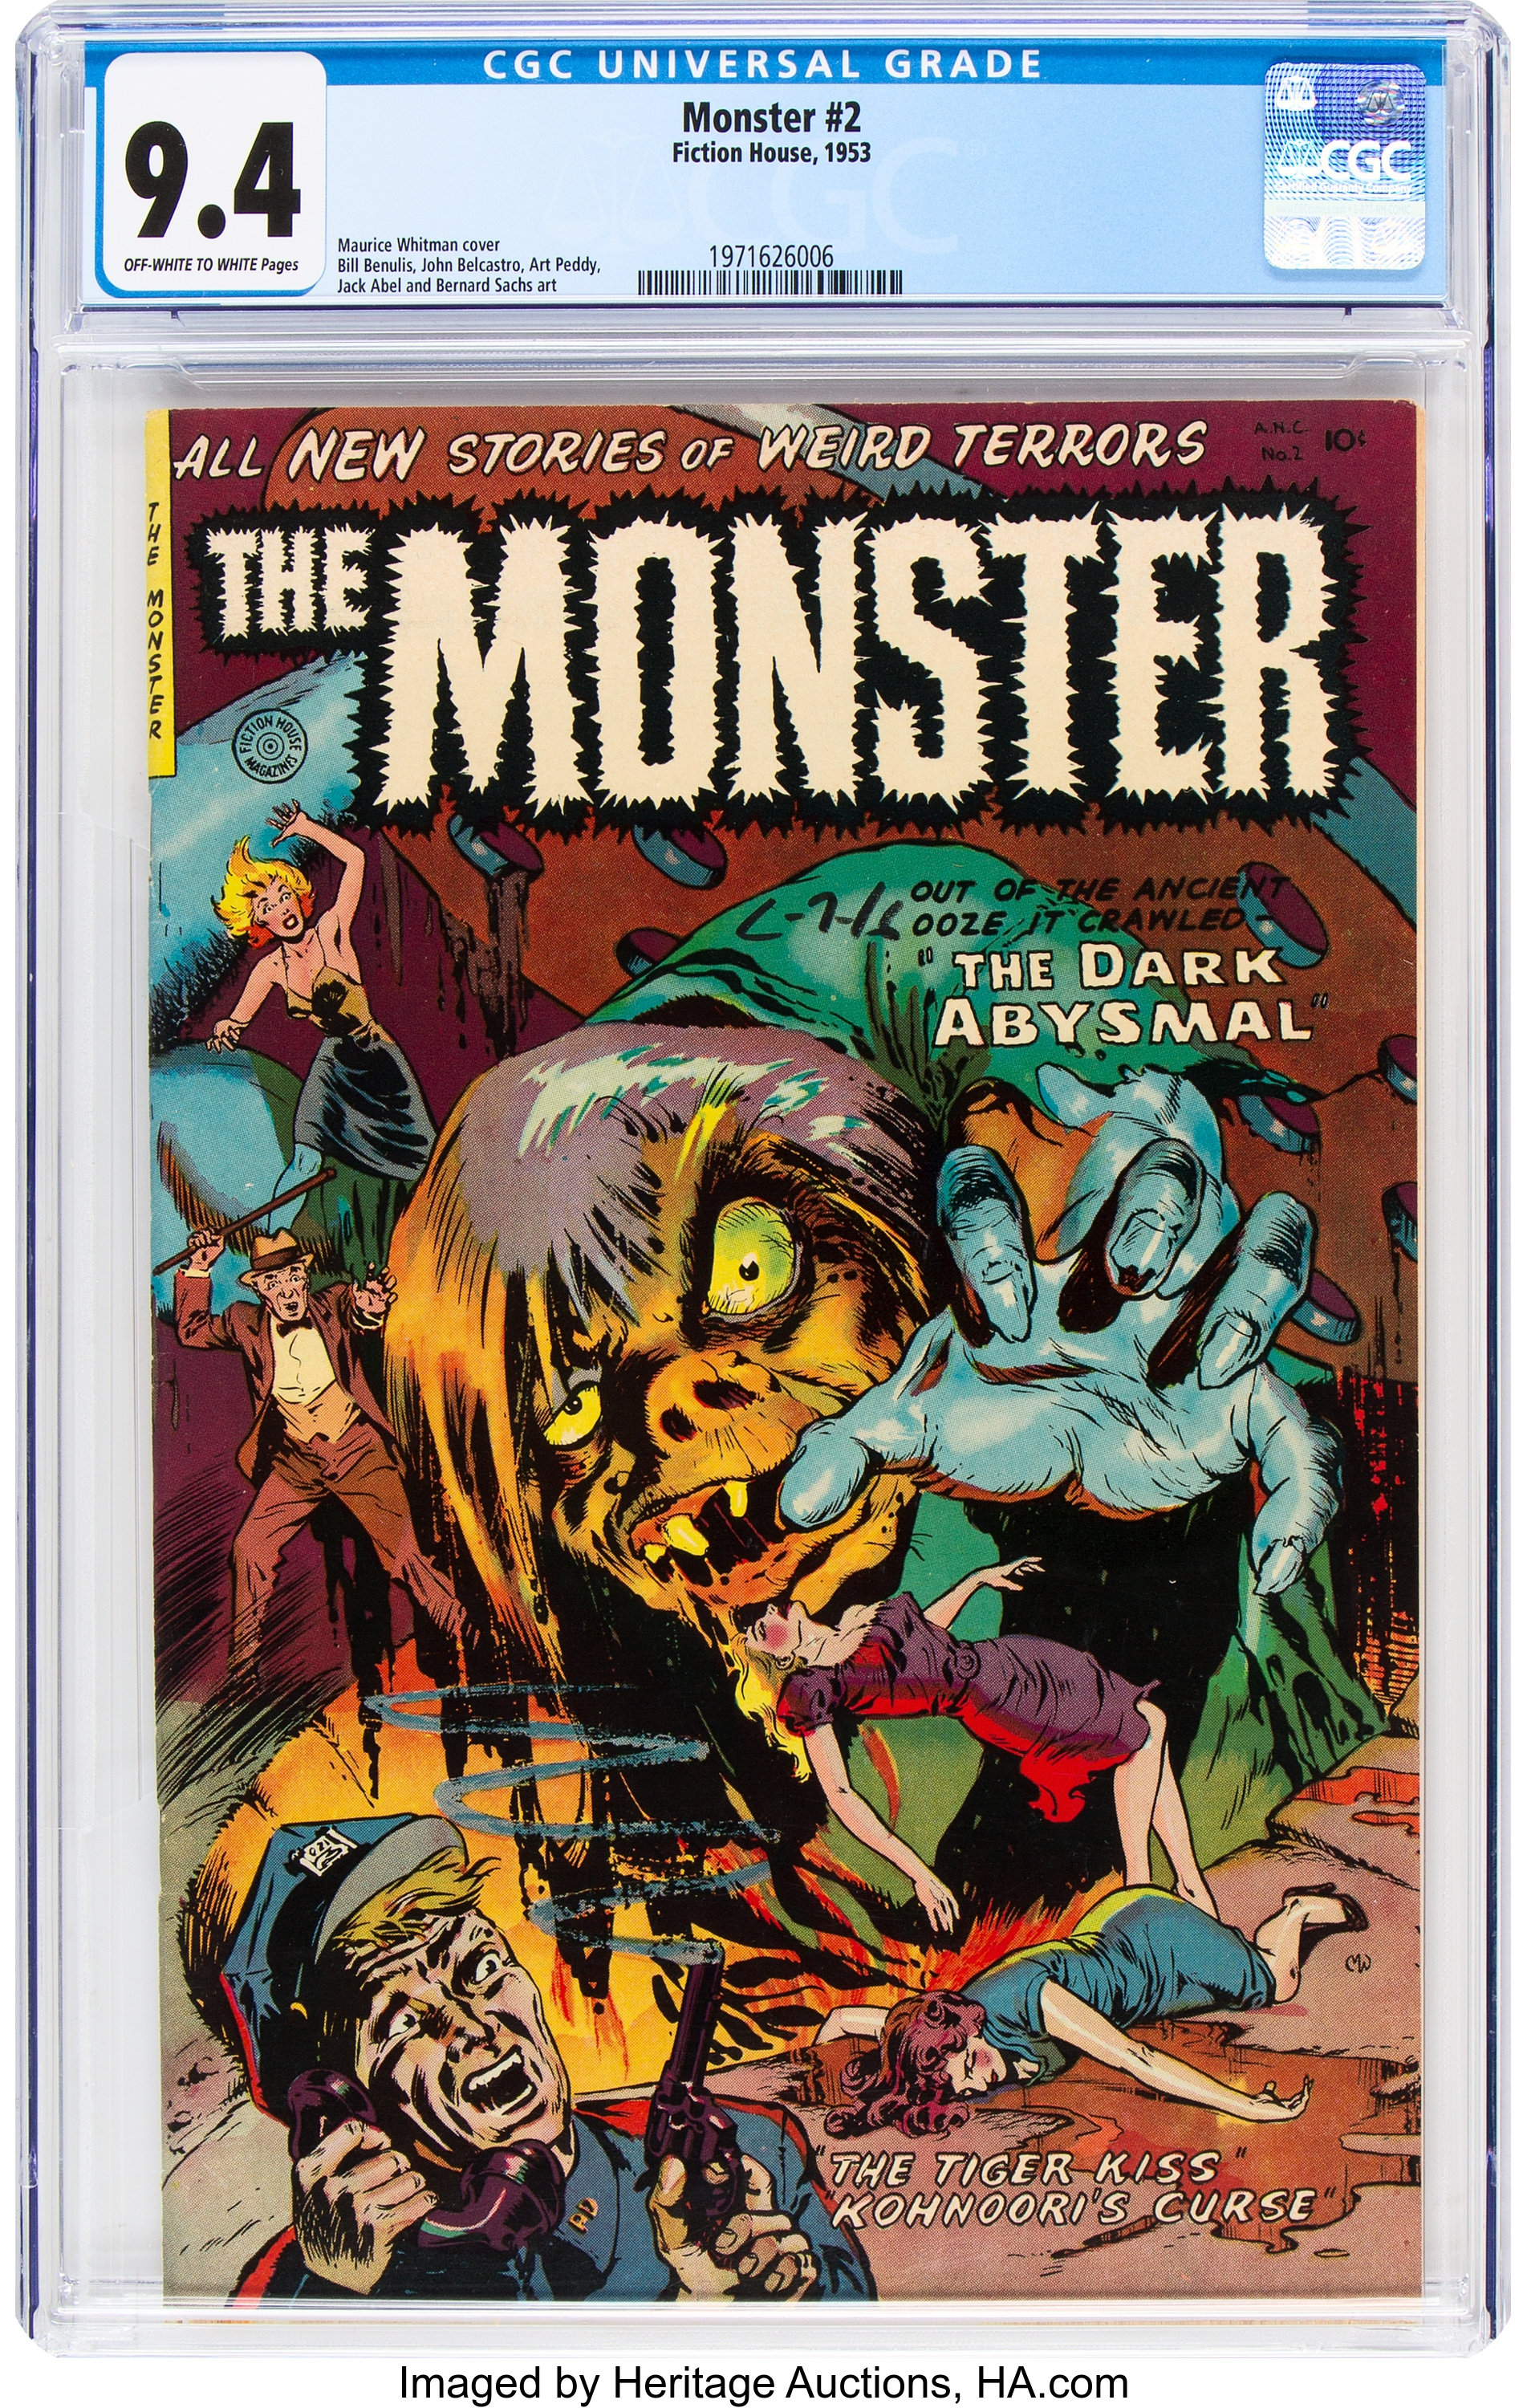 How Much Is Monster #2 Worth? Browse Comic Prices | Heritage Auctions